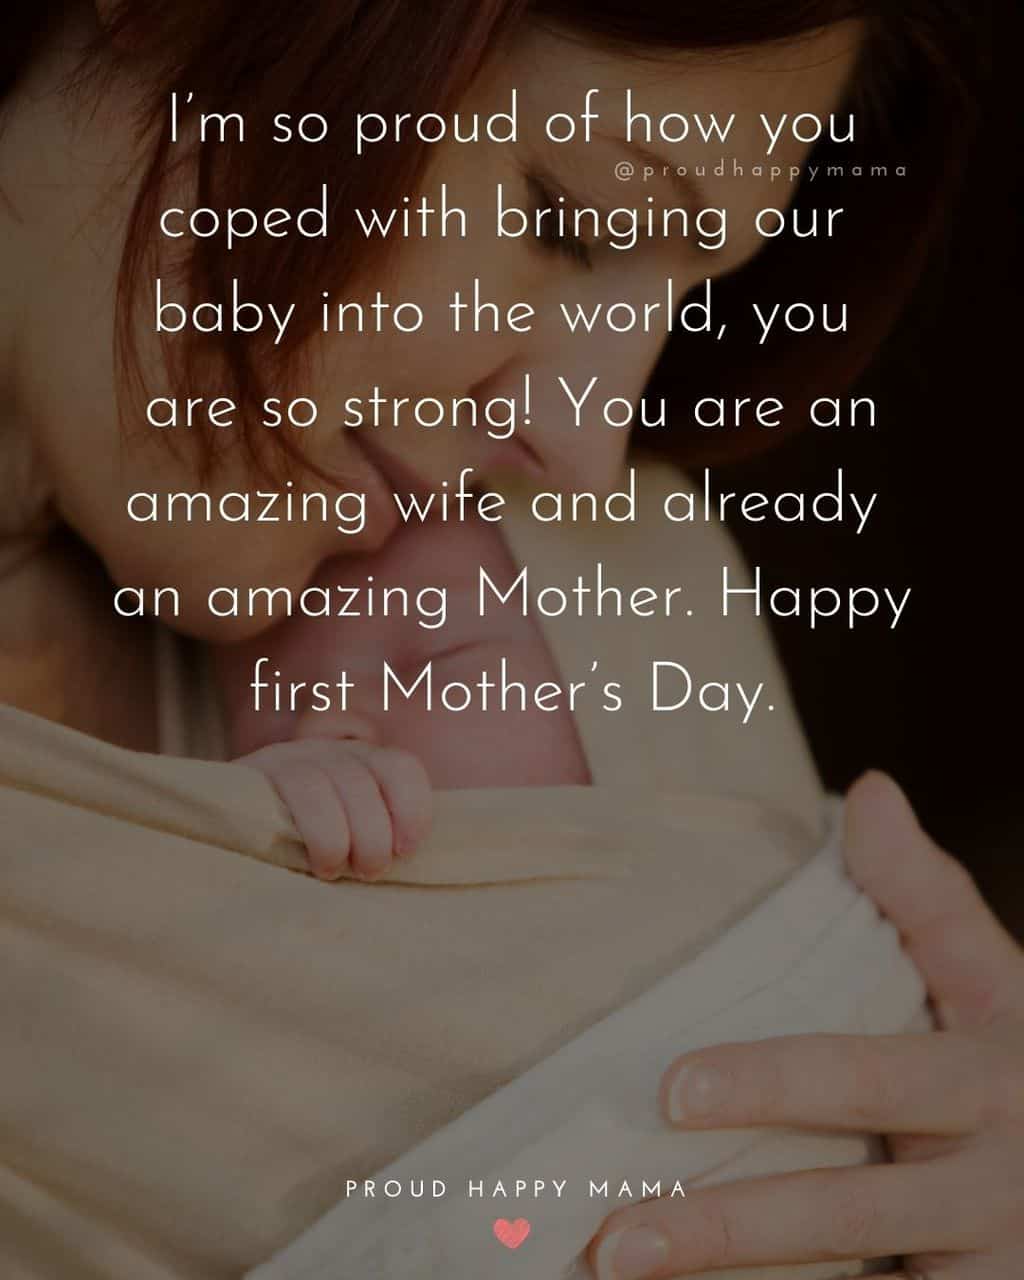 First Mothers Day Quotes - I’m so proud of how you coped with bringing our baby into the world, you are so strong! You are an